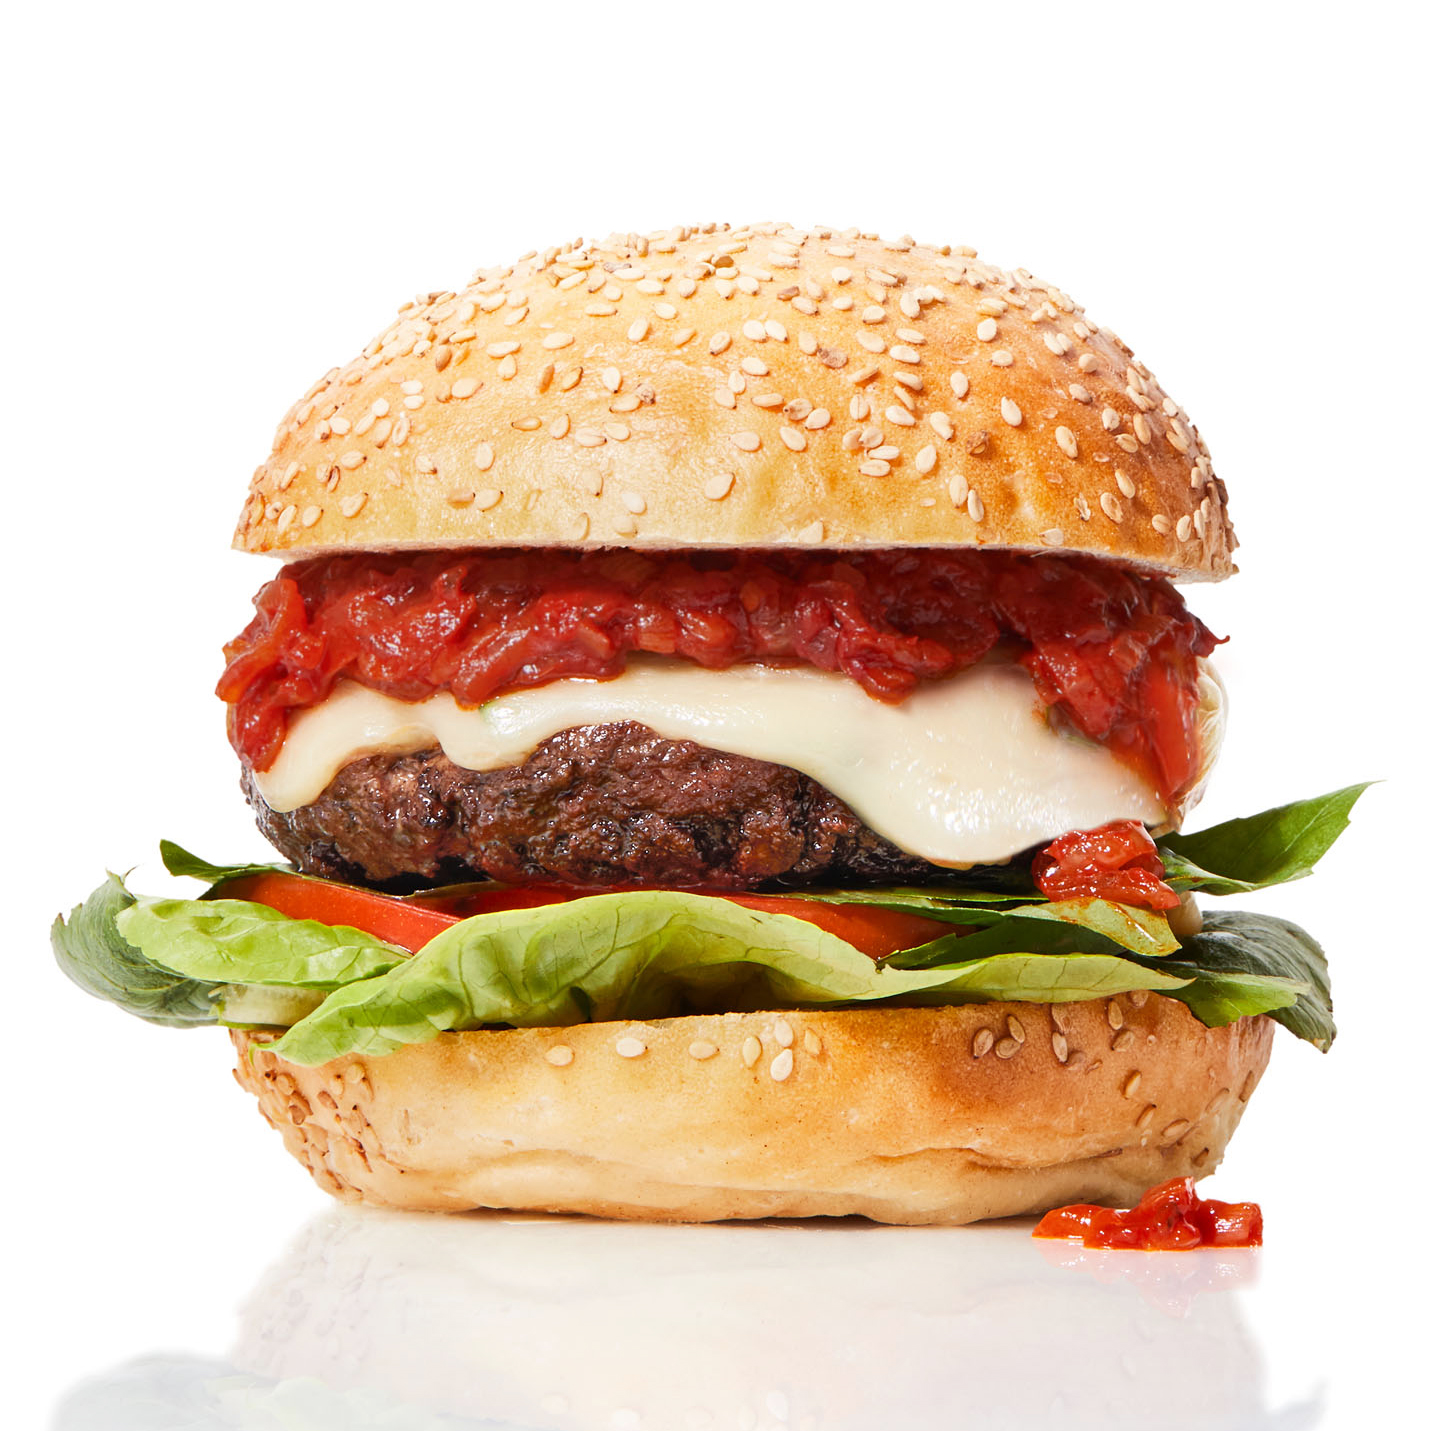 Rachael's Burger of the Month: Pizza Onion Burgers